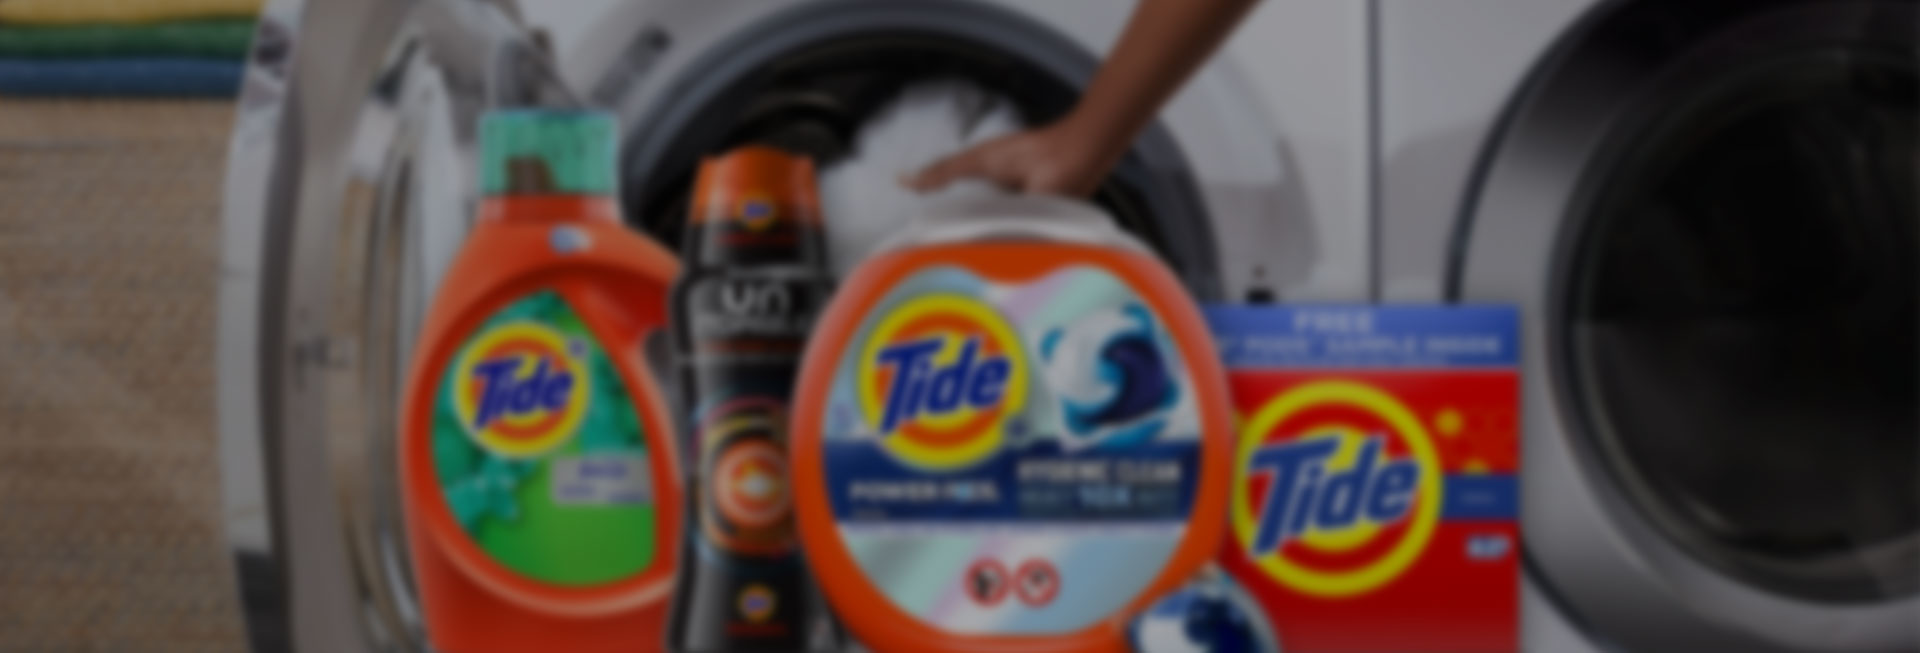 Various Tide products in front of a washer